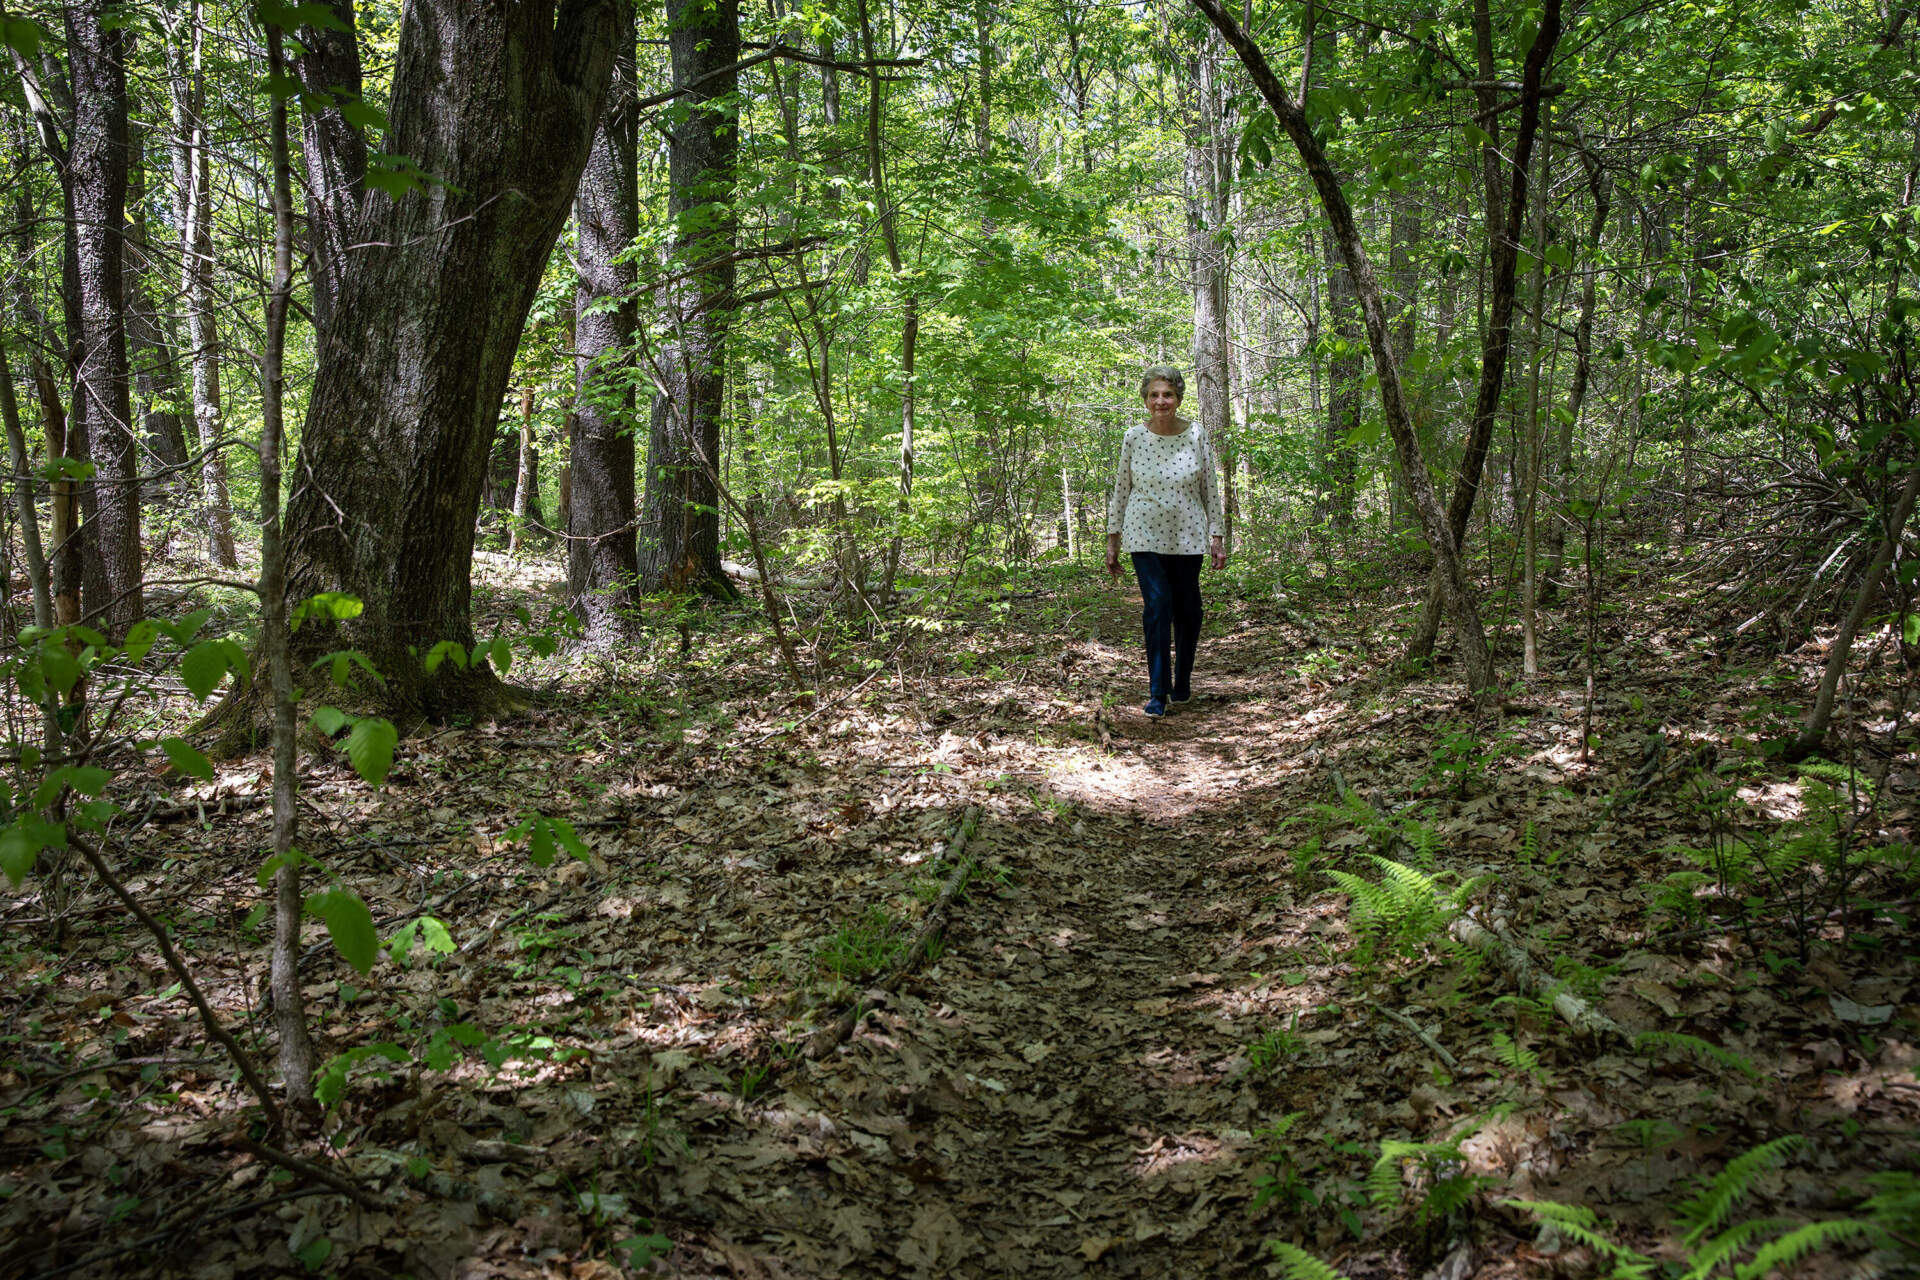 Carol Williams walks through the woods behind her home which she hopes to restrict from future development. (Robin Lubbock/WBUR)